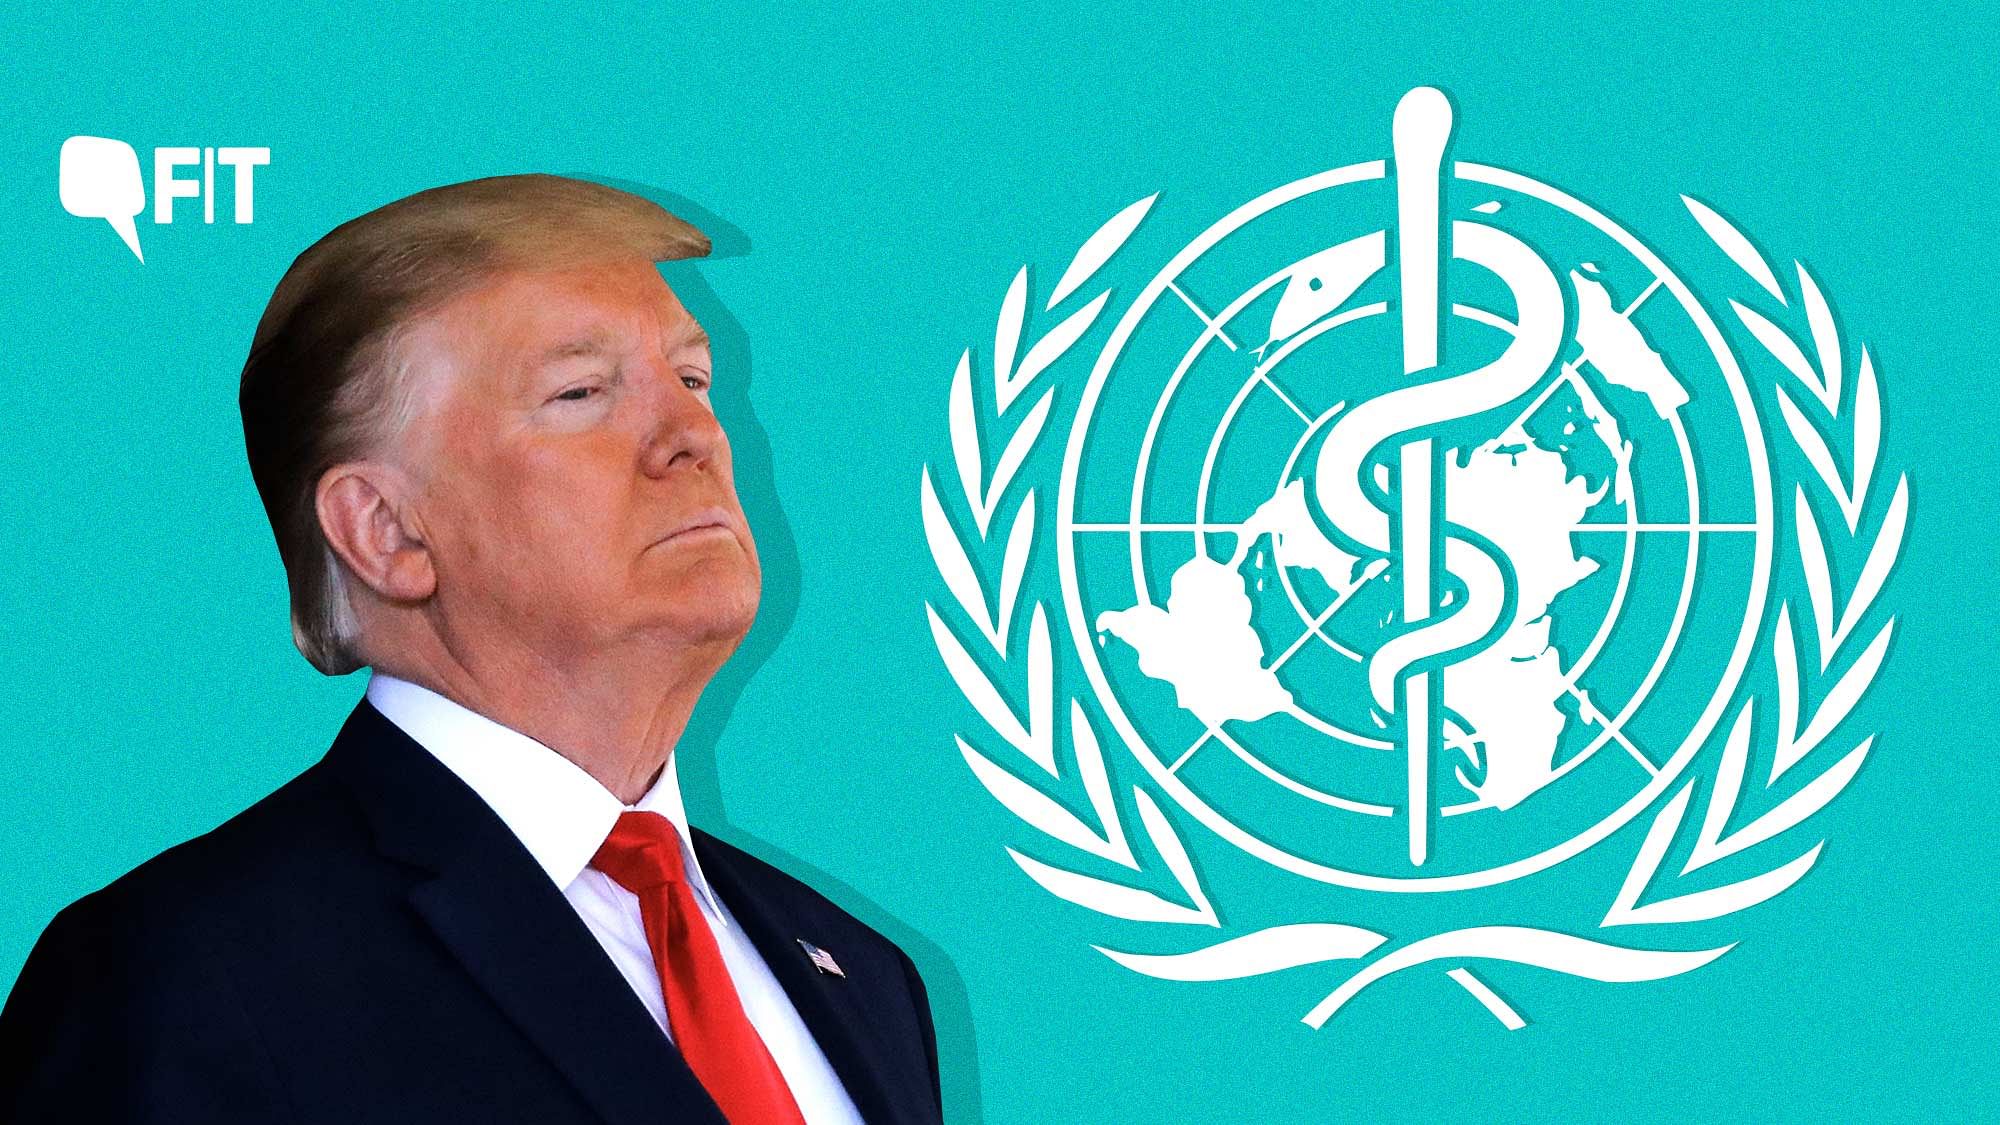 COVID-19: President Trump announced withdrawal of support to the WHO in the midst of a pandemic.